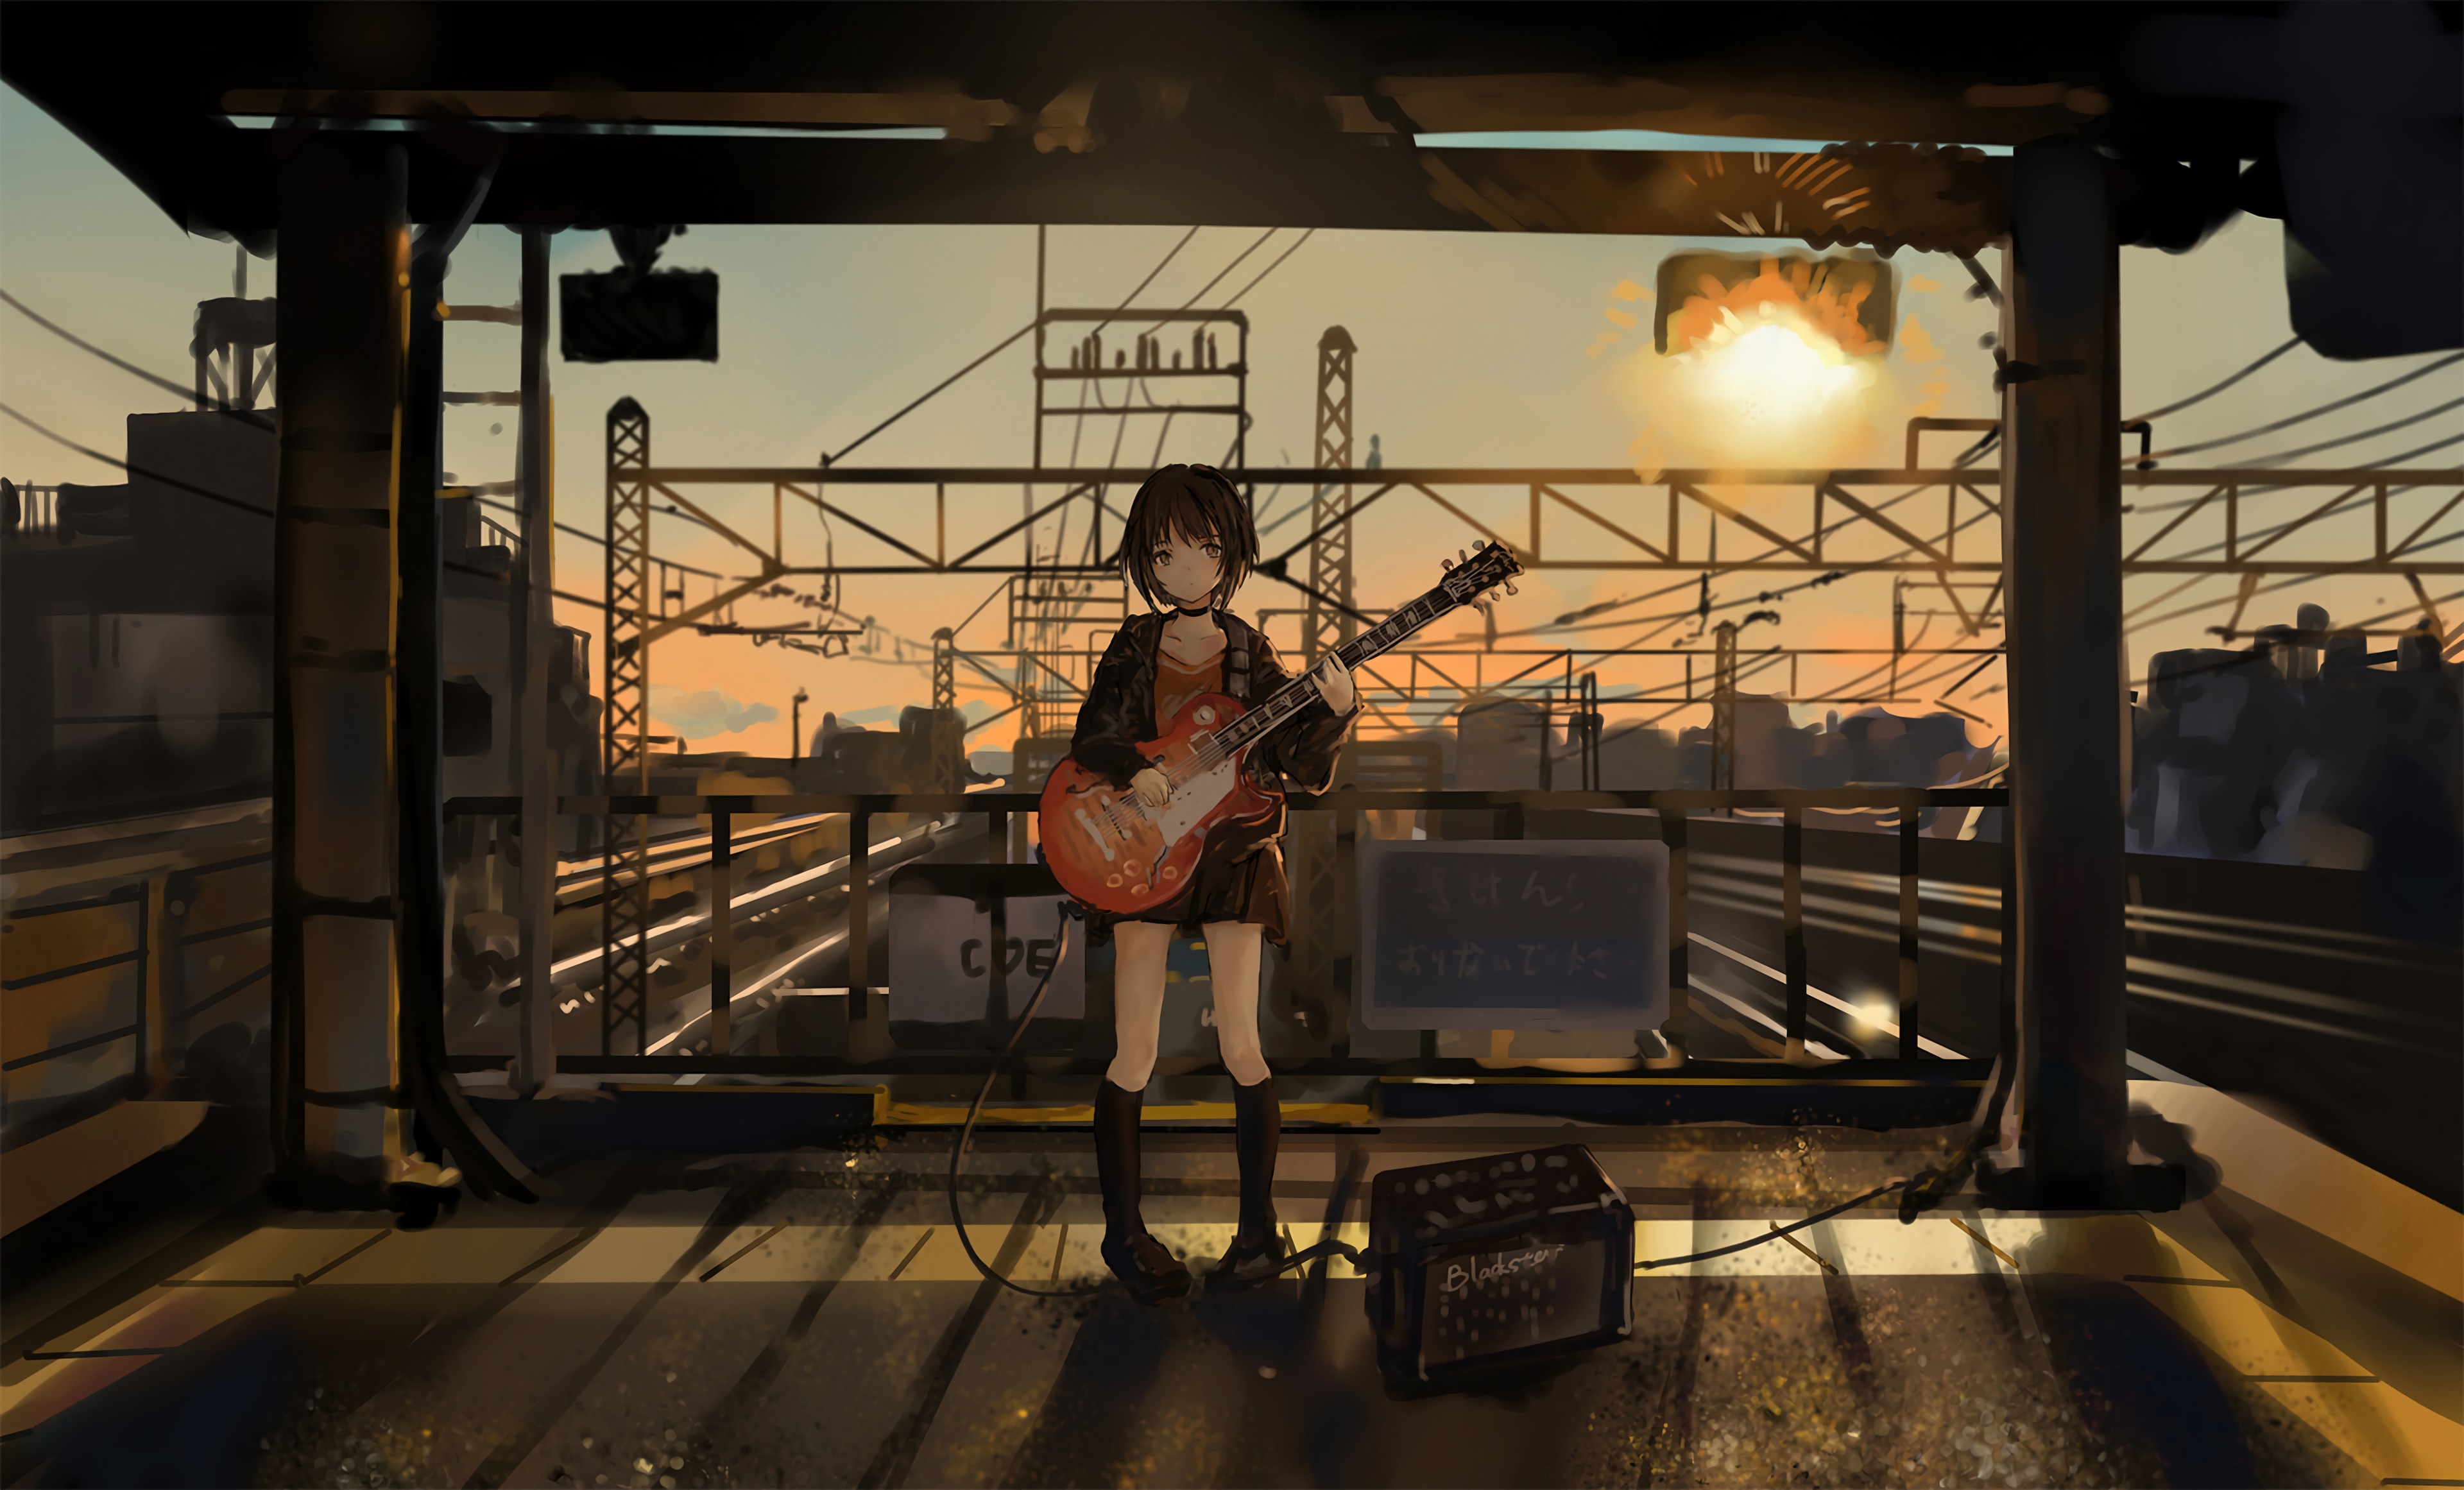 118674 download wallpaper anime, girl, art, guitar, musician, electric guitar screensavers and pictures for free